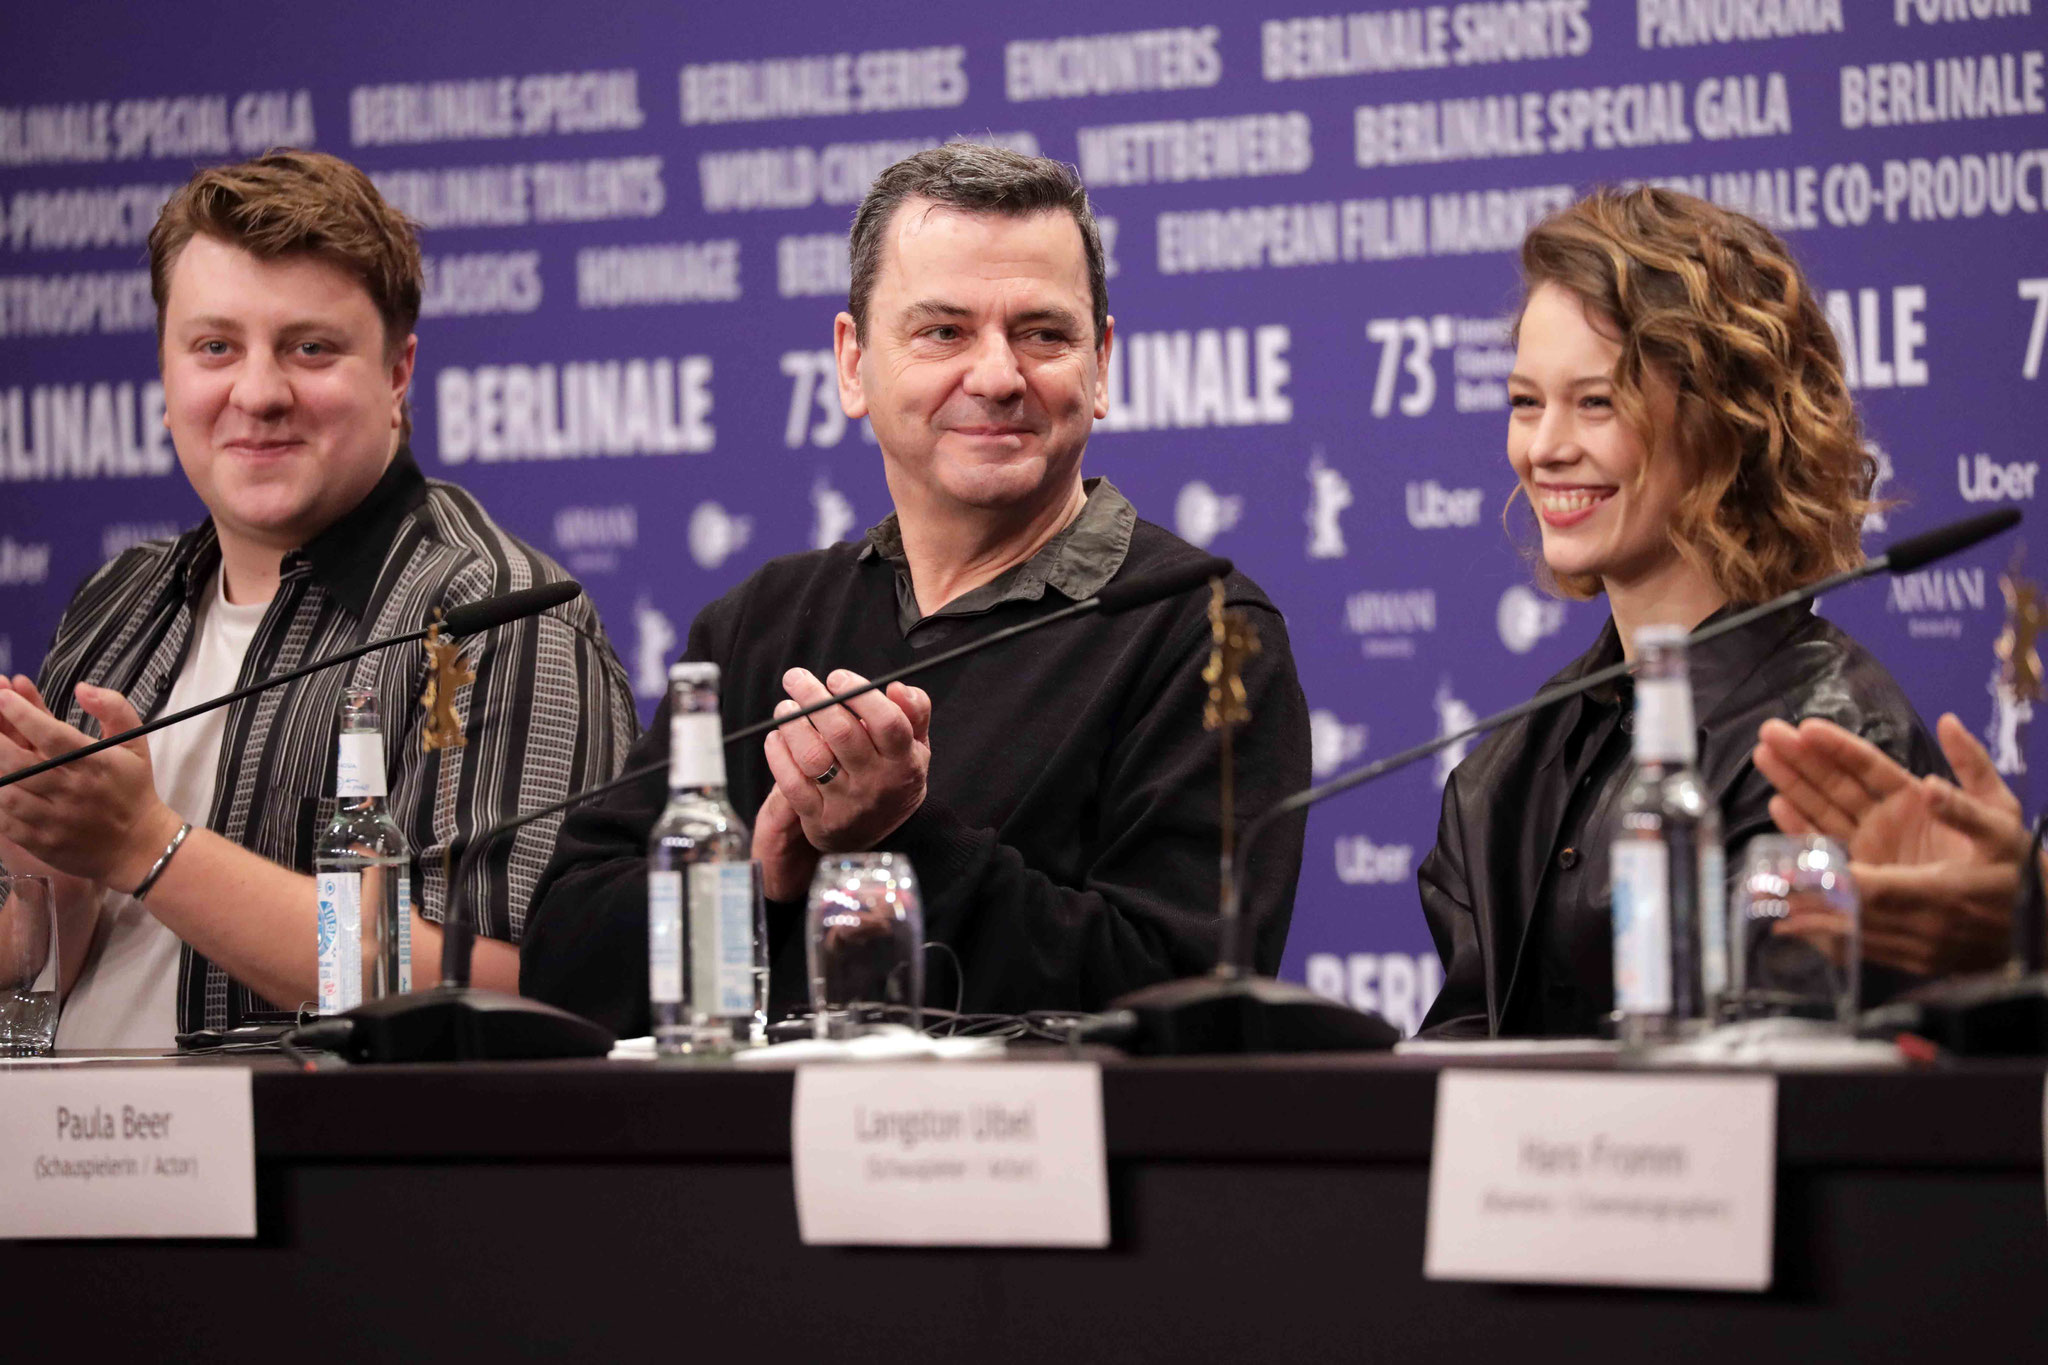 Thomas Schubert, Christian Petzold and Paula Beer during the press conference for the film "Roter Himmel".